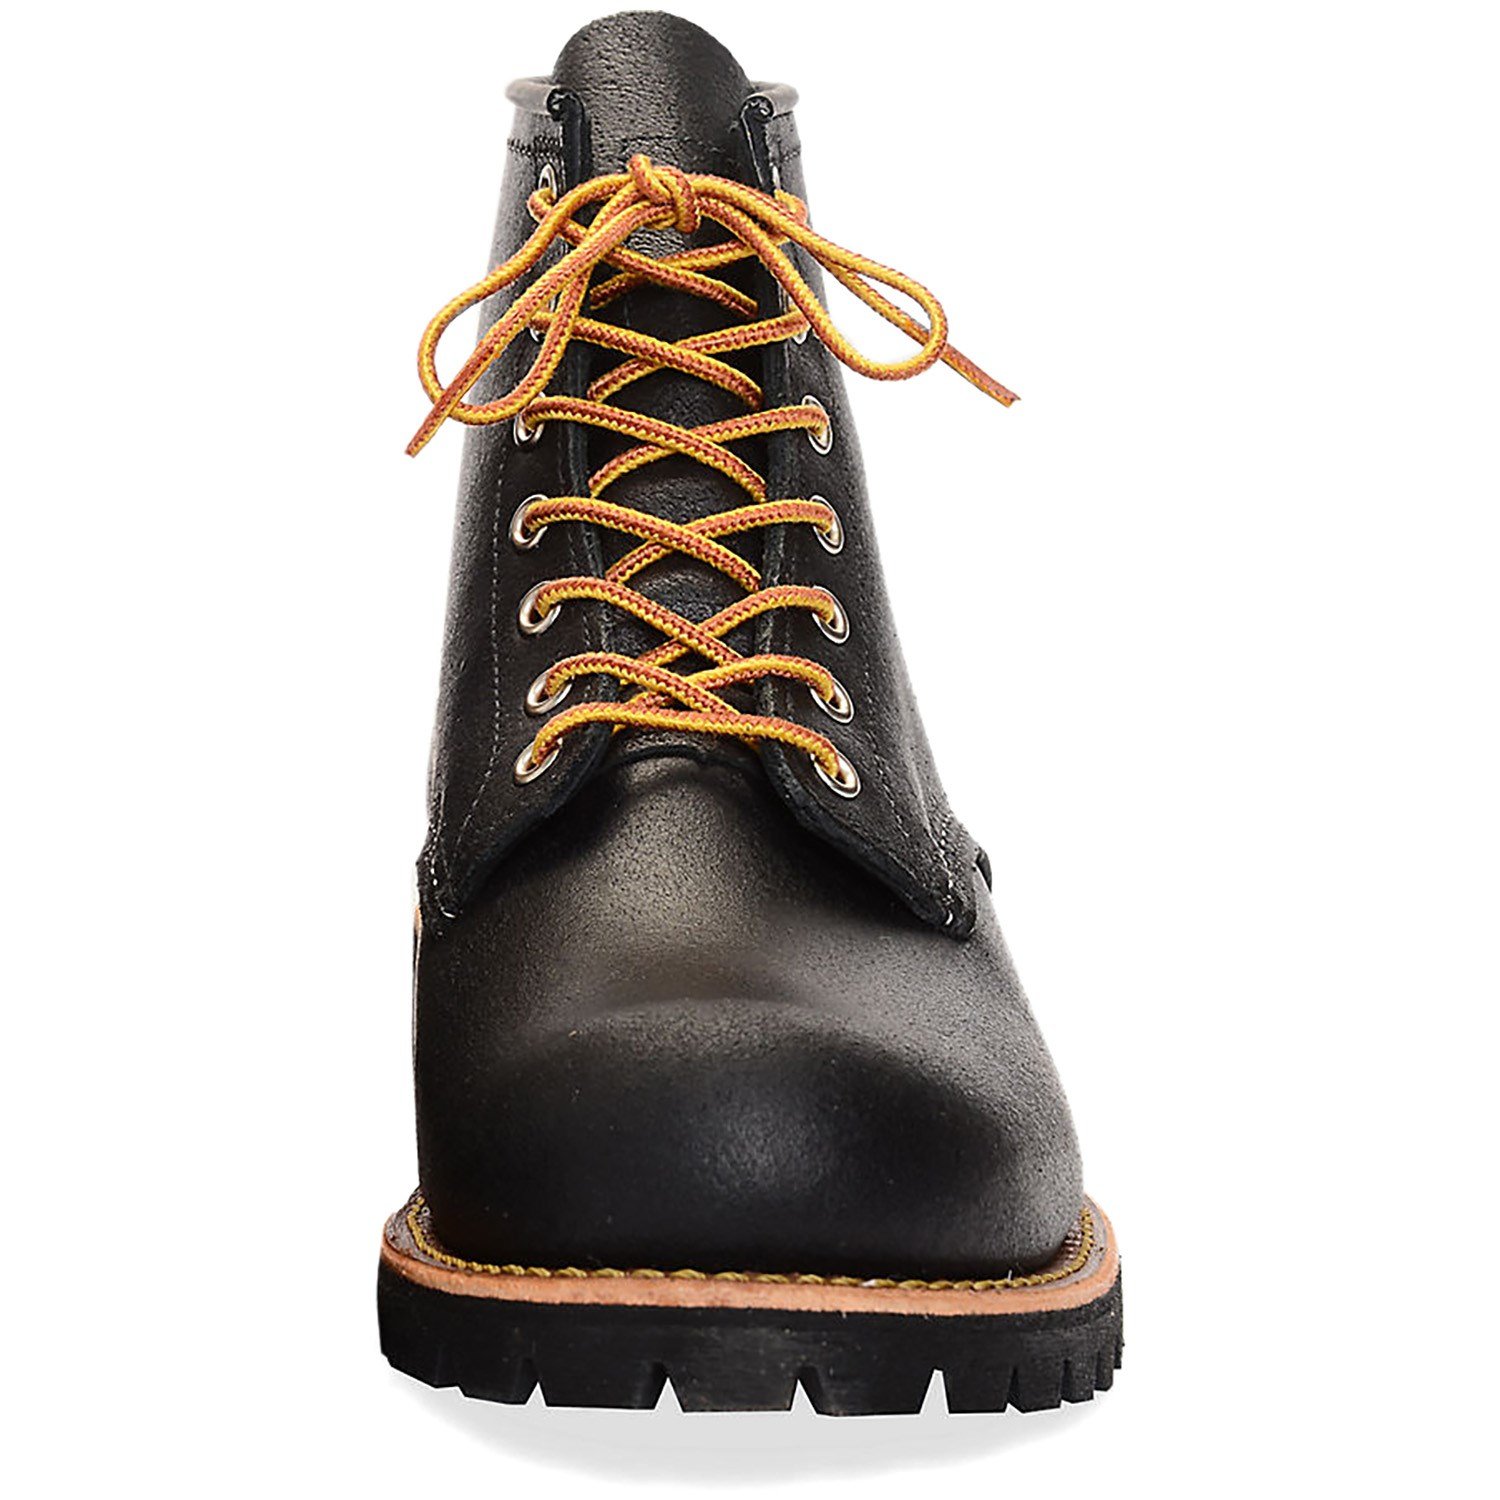 Red Wing Roughneck Round Toe Boots | evo